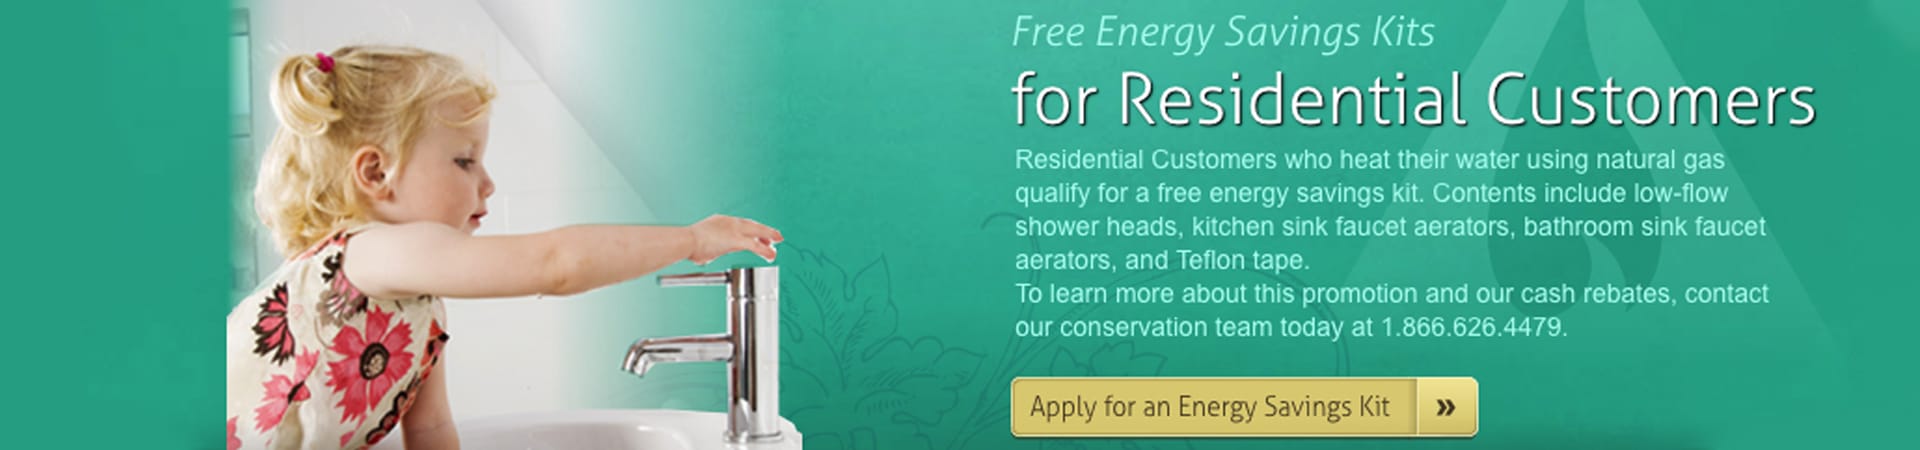 cascade-natural-gas-free-energy-savings-kit-for-residential-customers